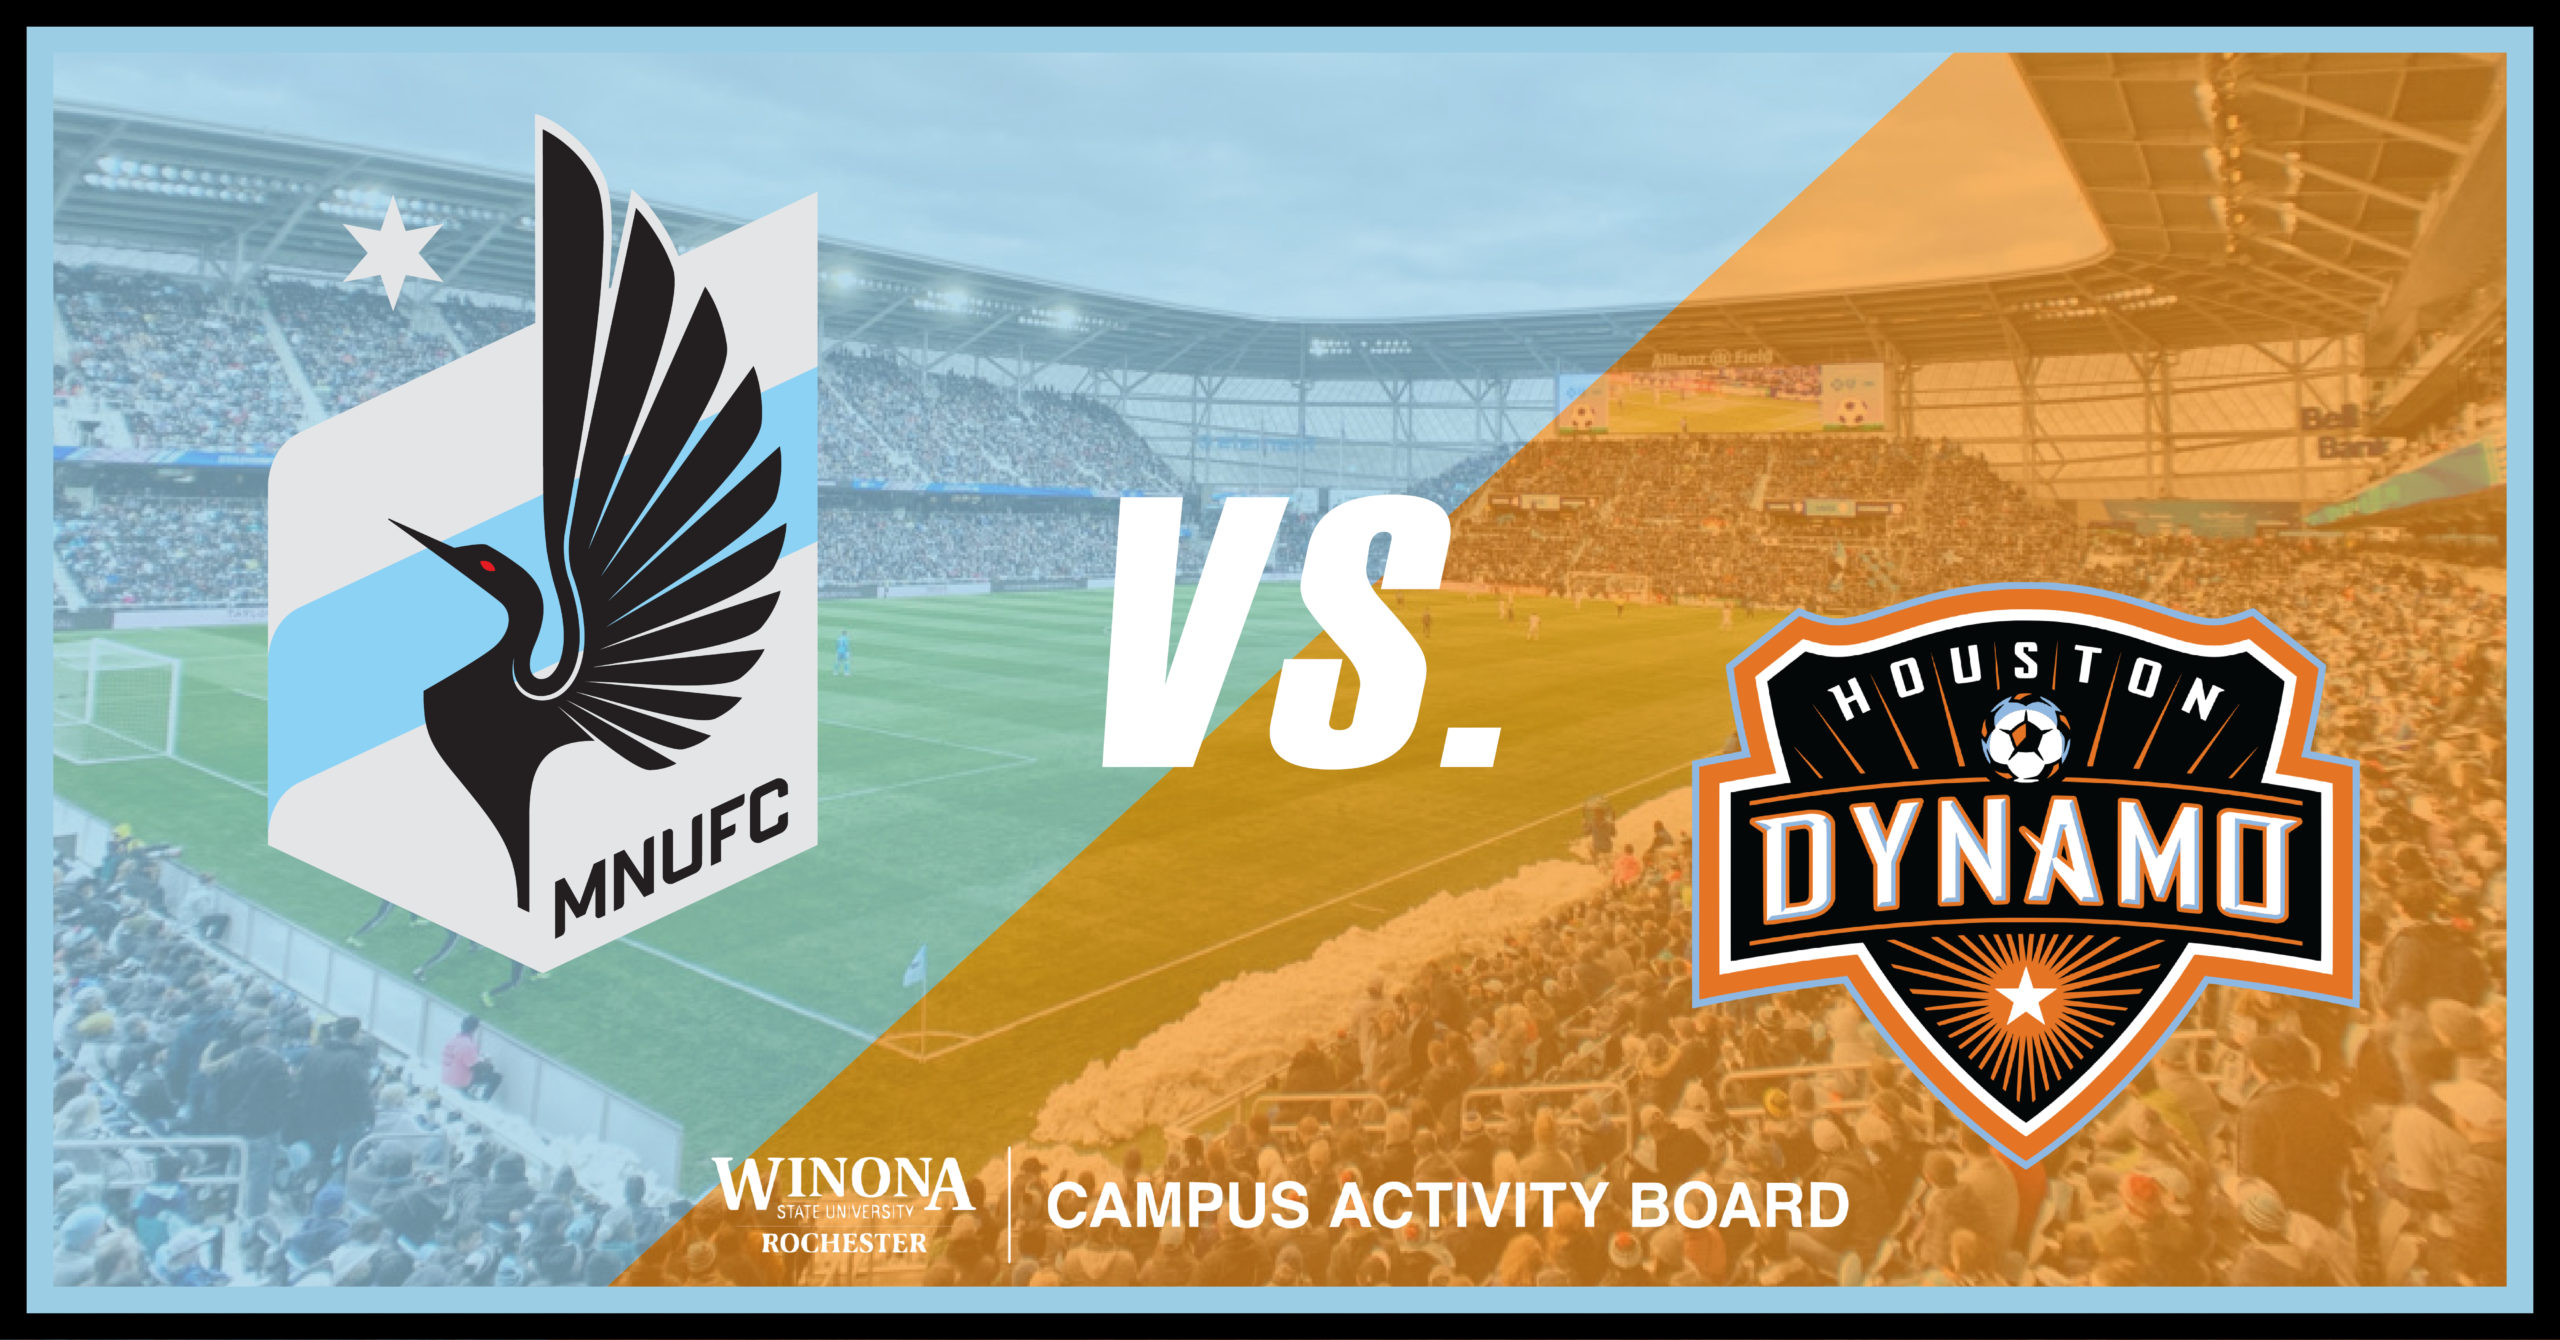 WSU-Rochester students are invited to join us for a bus trip to watch a soccer match with the Minnesota United